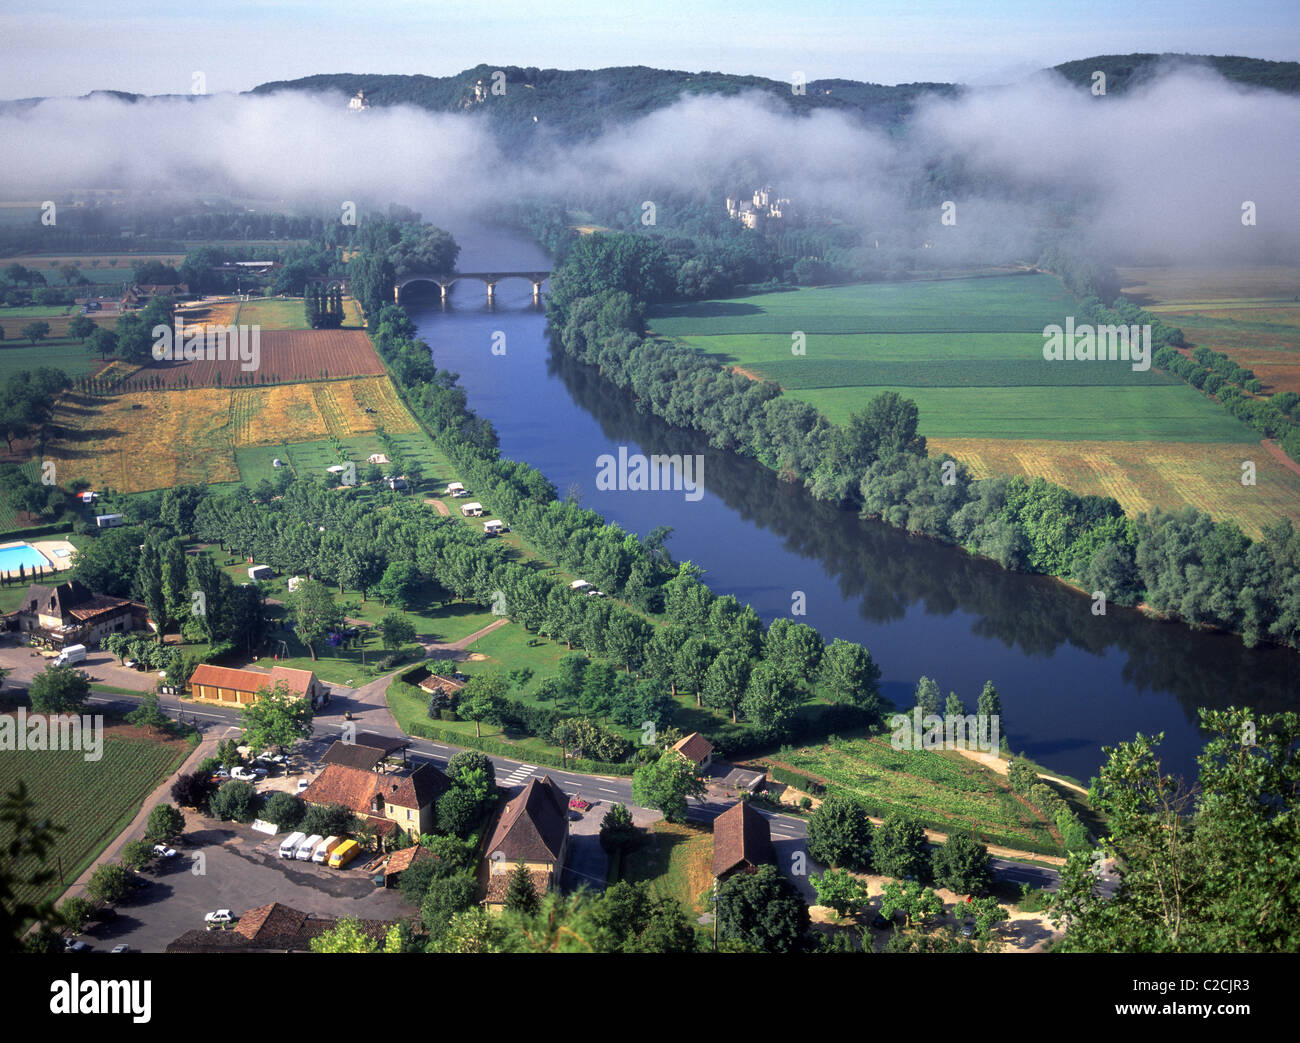 Aerial view of French agriculture farmland in countryside landscape with mist low cloud over the Dordogne river at Domme Dordogne Perigord France Stock Photo